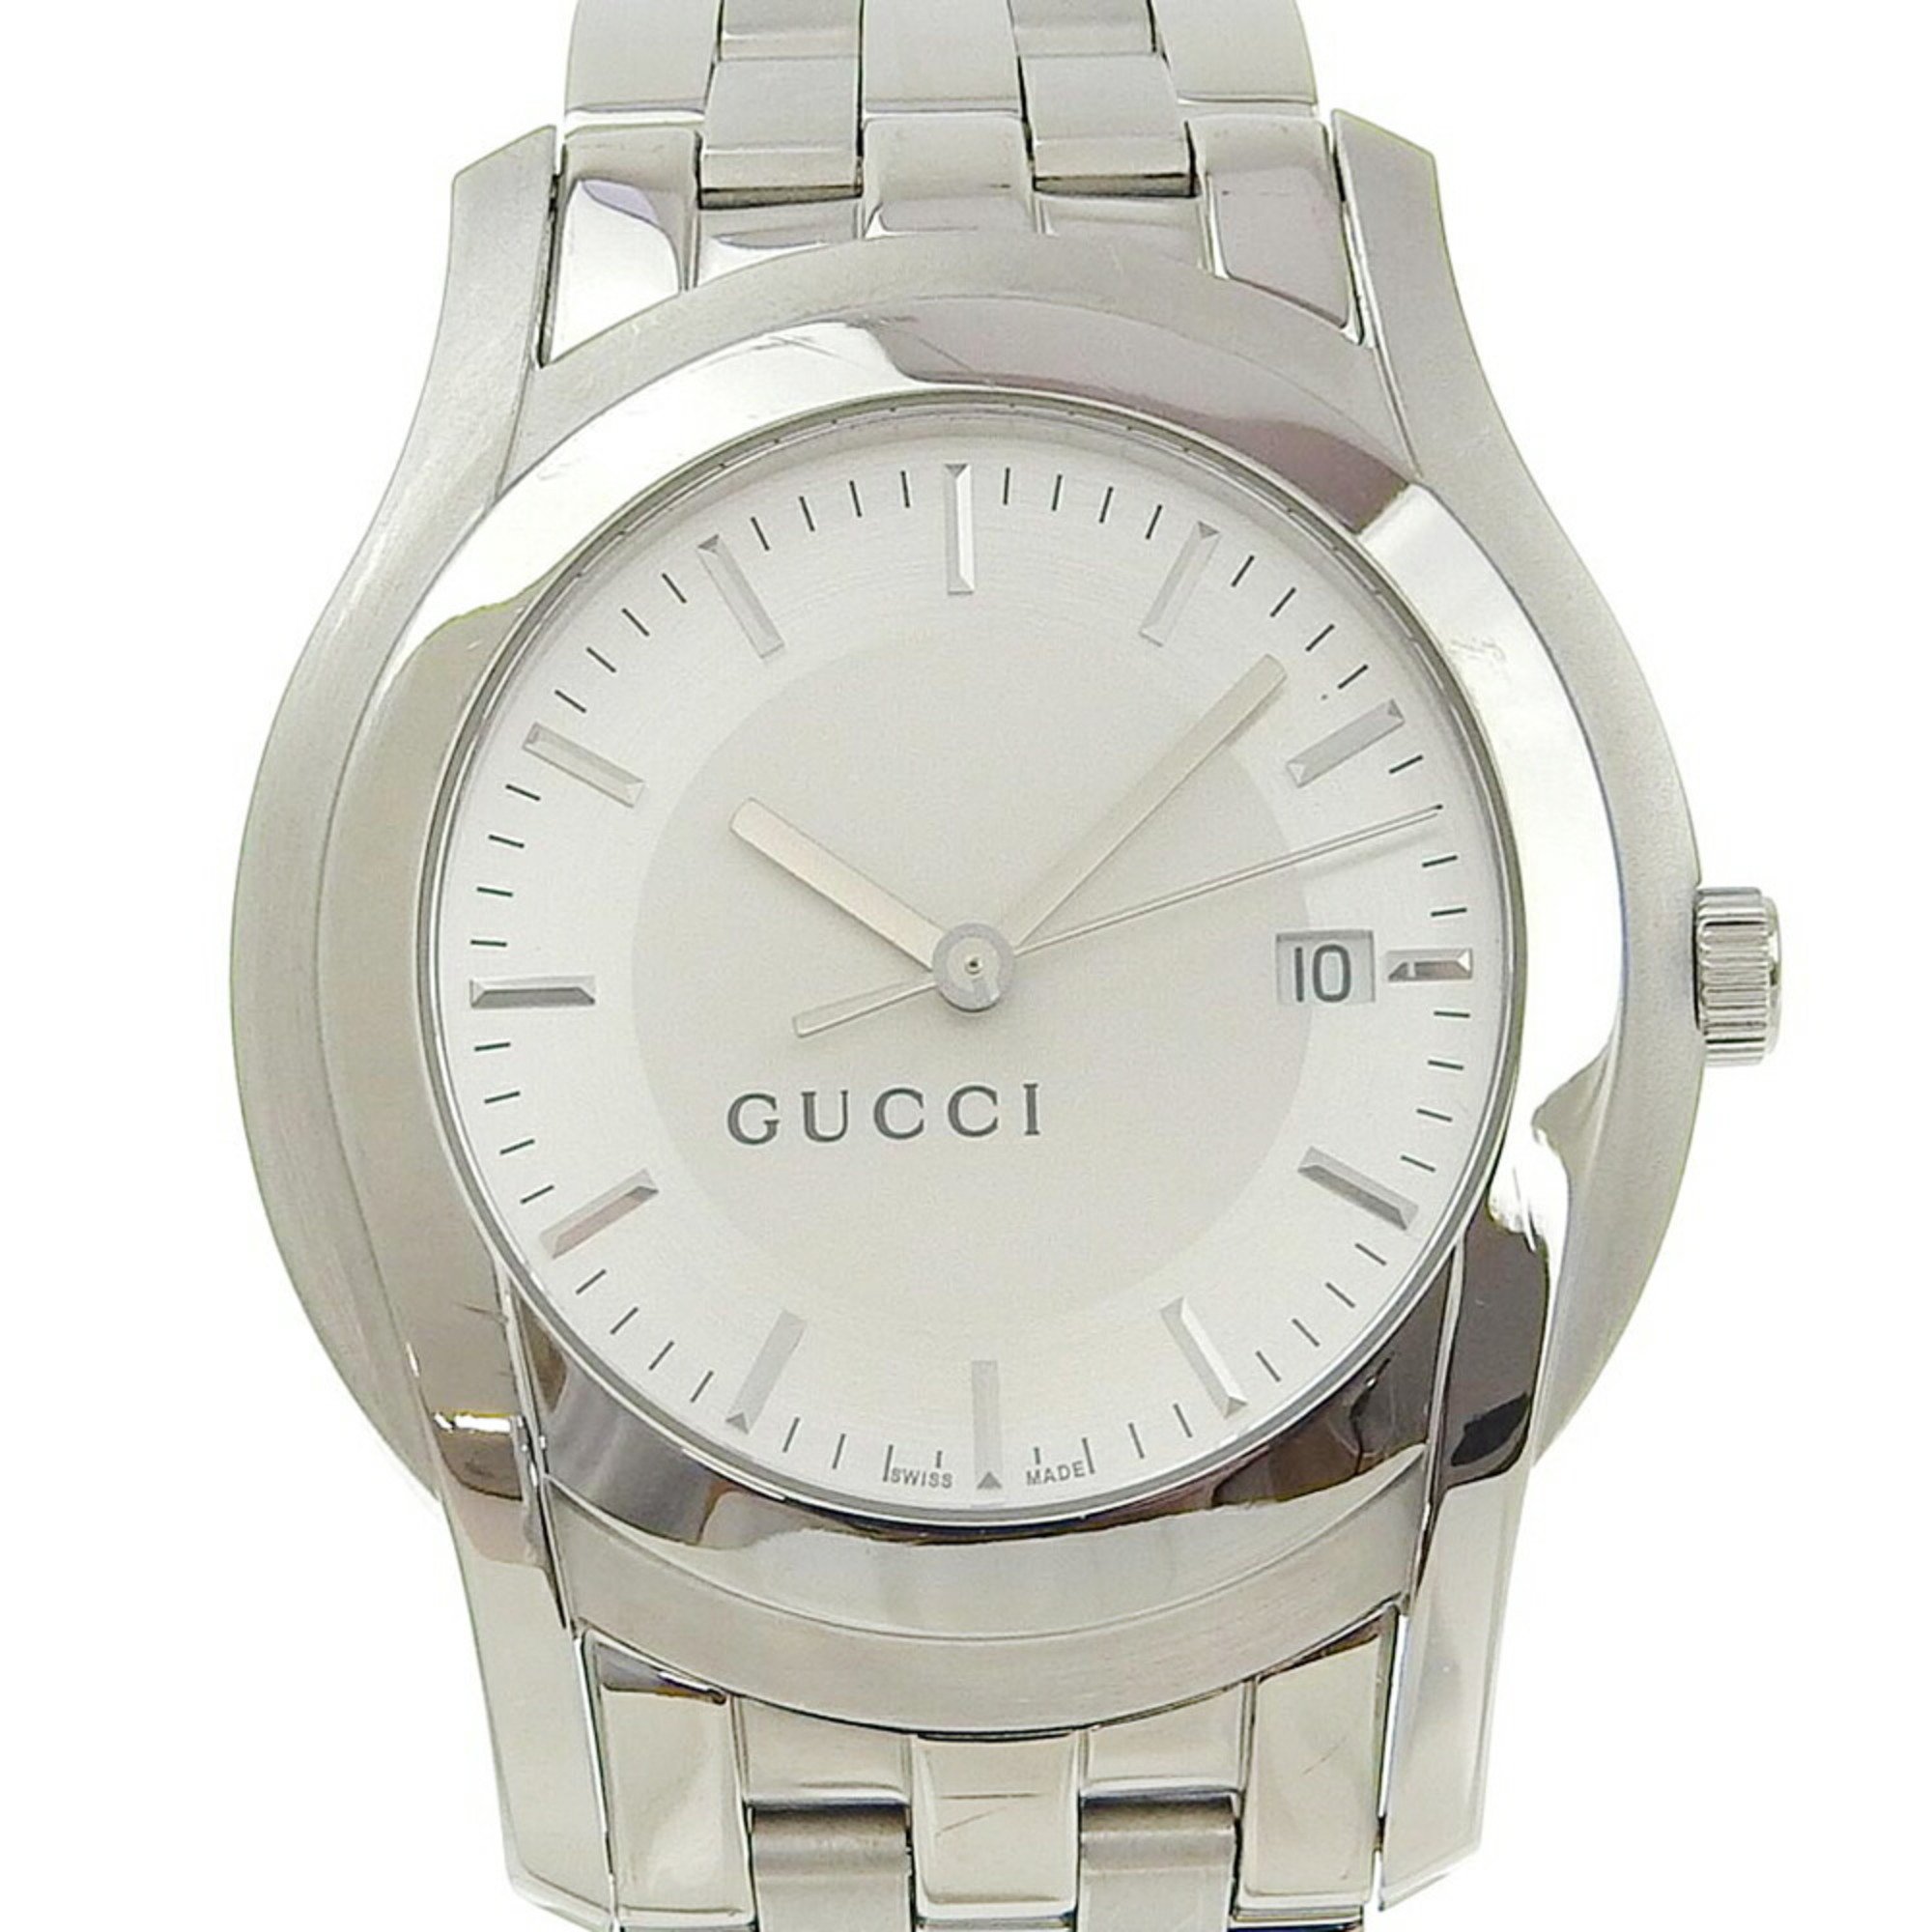 Gucci 5500XL Stainless Steel Quartz Analog Display Silver Dial Men's Watch